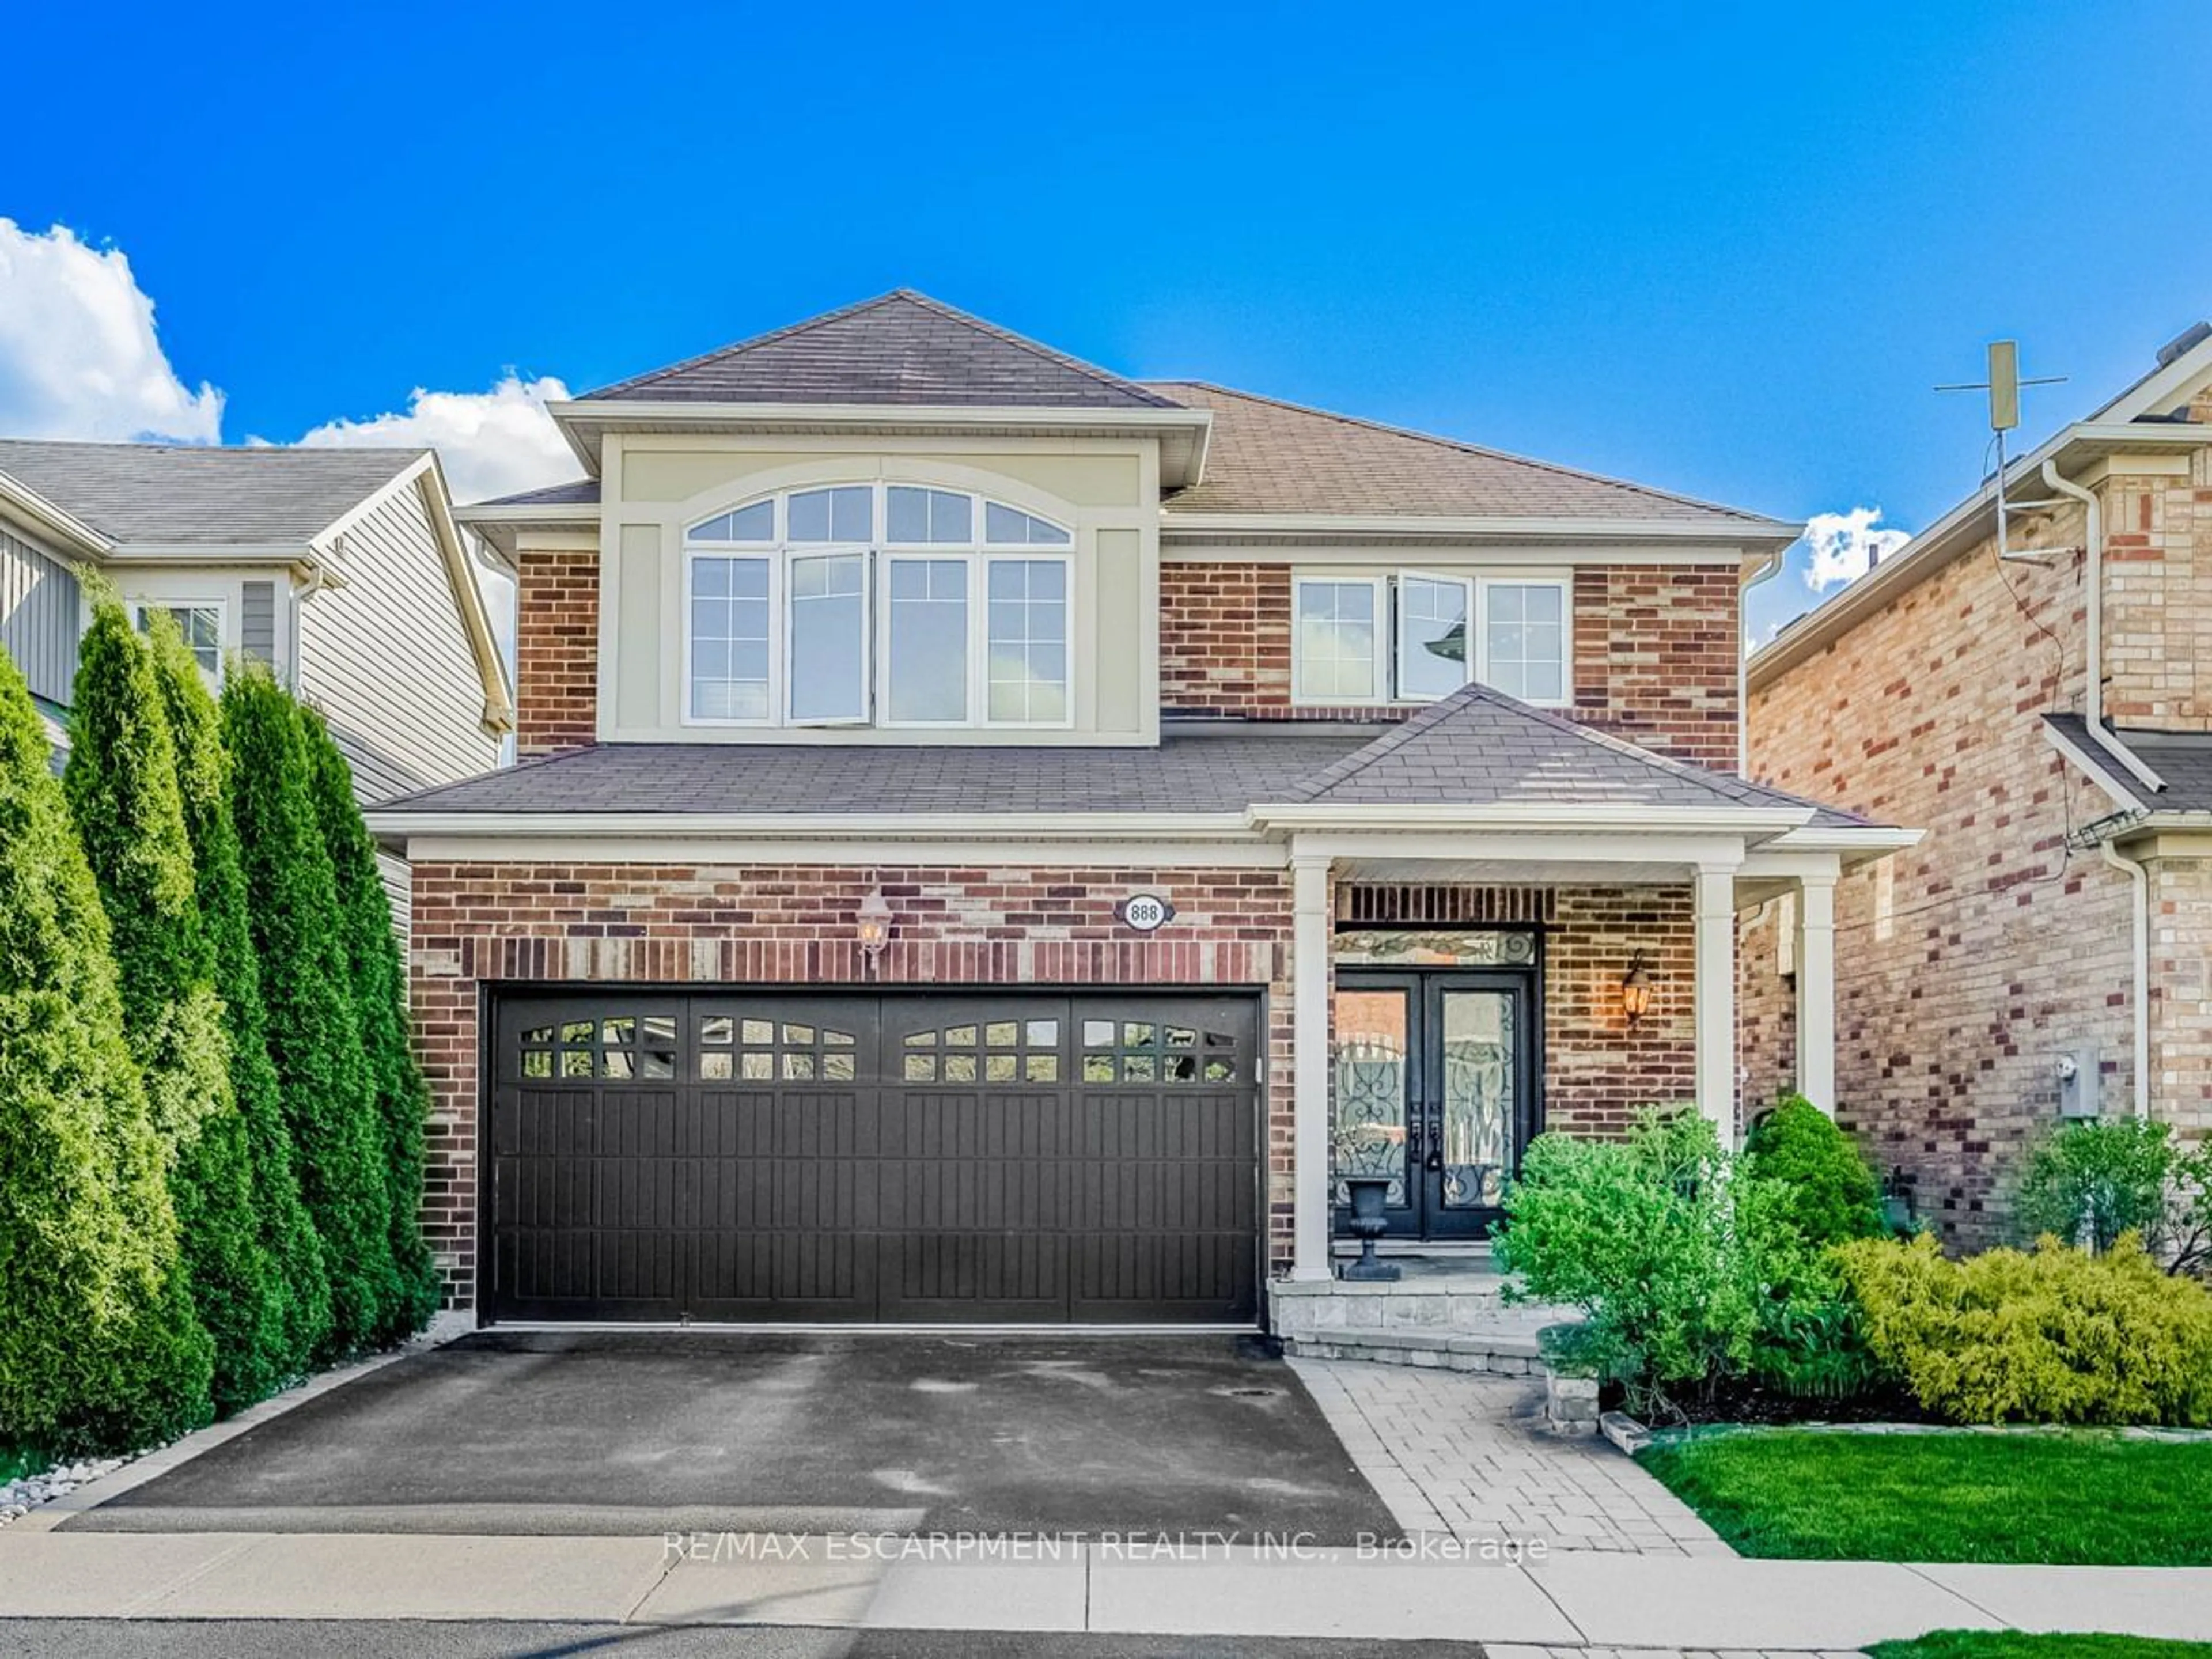 Home with brick exterior material for 888 Toletza, Milton Ontario L9T 7T7